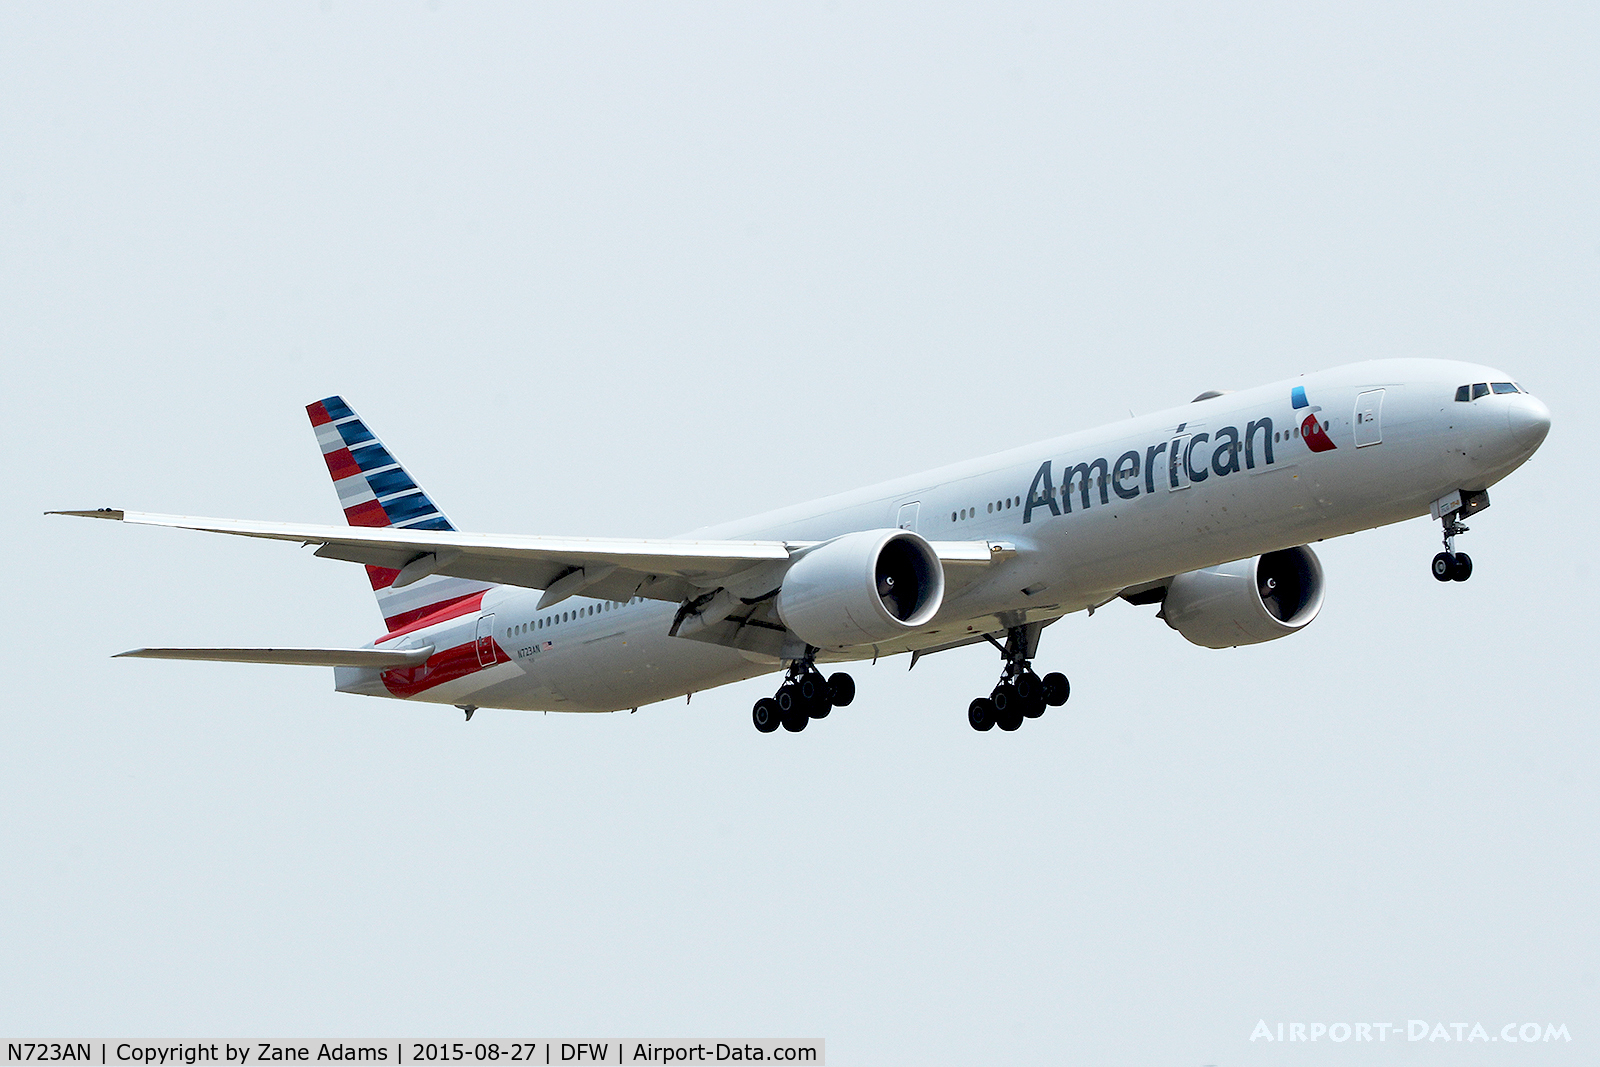 N723AN, 2013 Boeing 777-323/ER C/N 33125, American Airlines arriving at DFW Airport